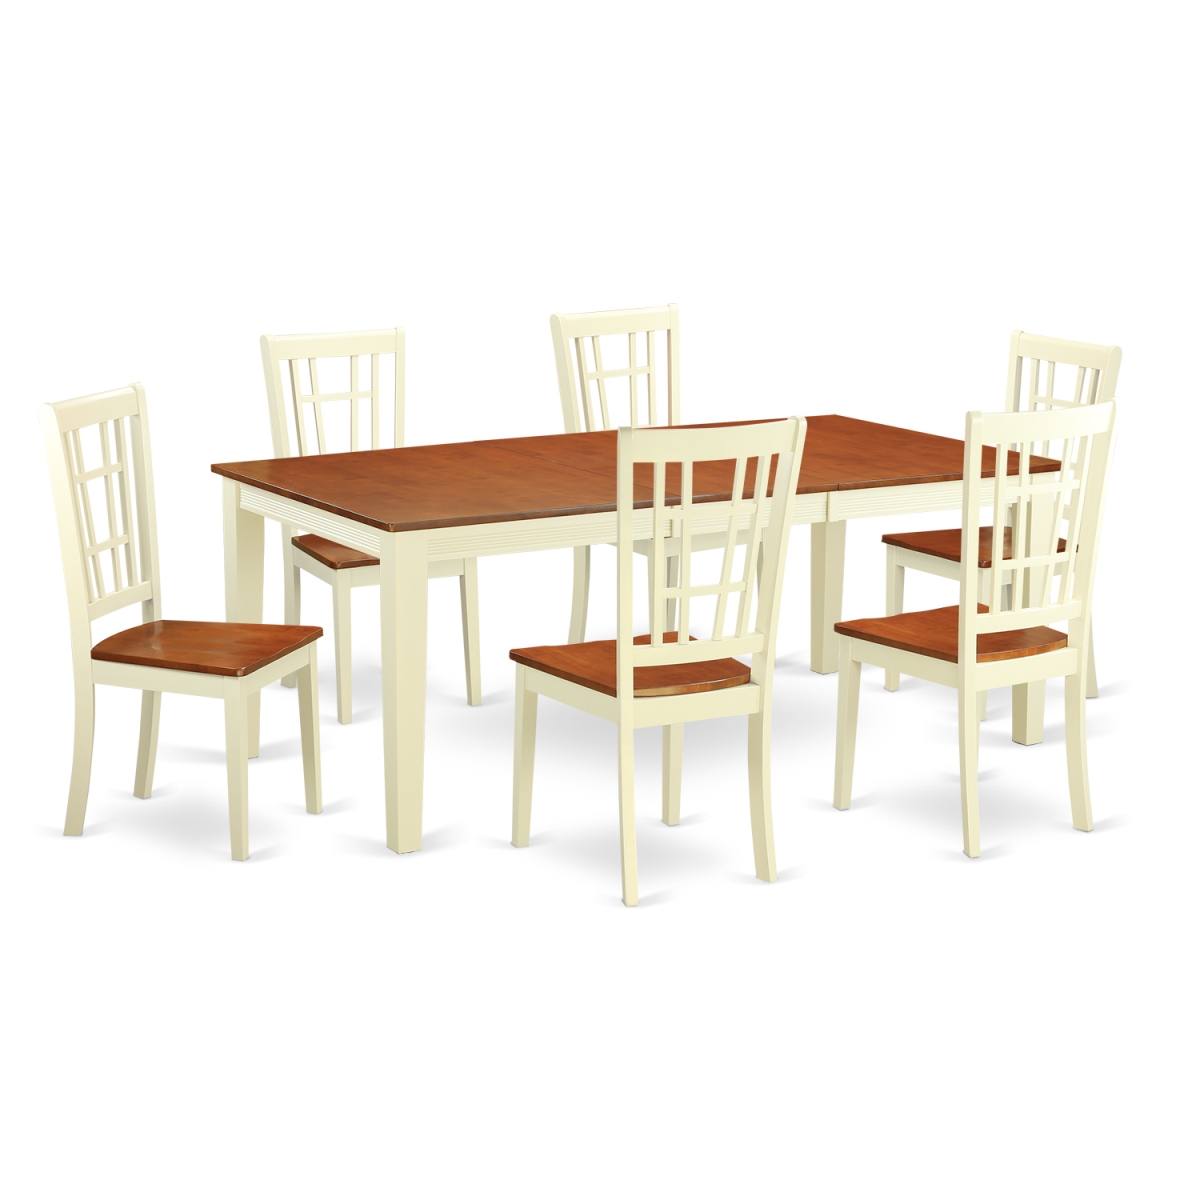 Dinette Table Set With 6 Kitchen Table & 6 Chairs, Buttermilk & Cherry - 7 Piece